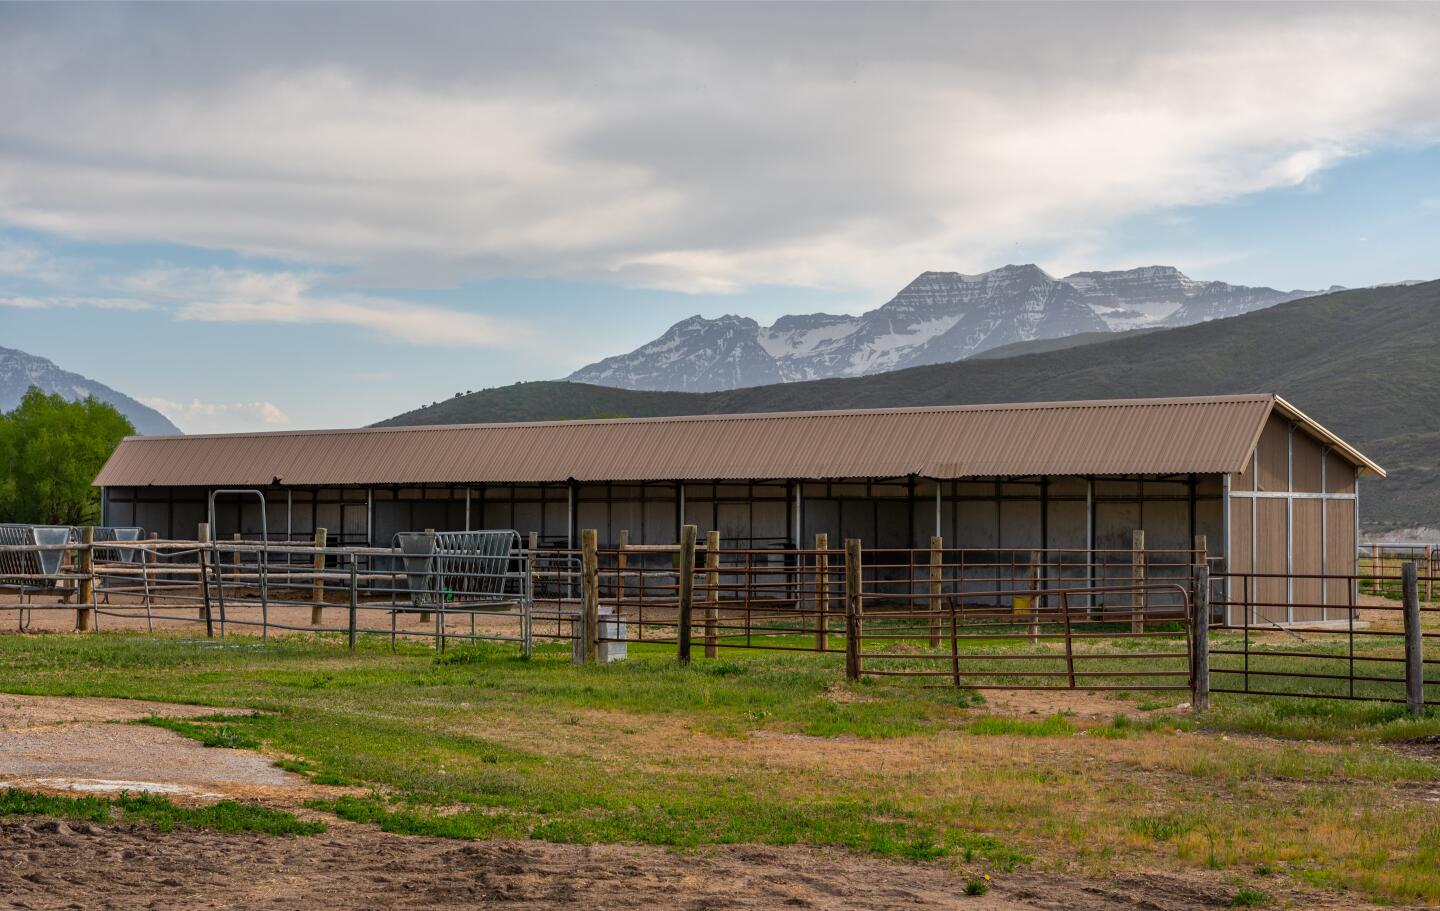 The horse stalls with the mountains behind them.